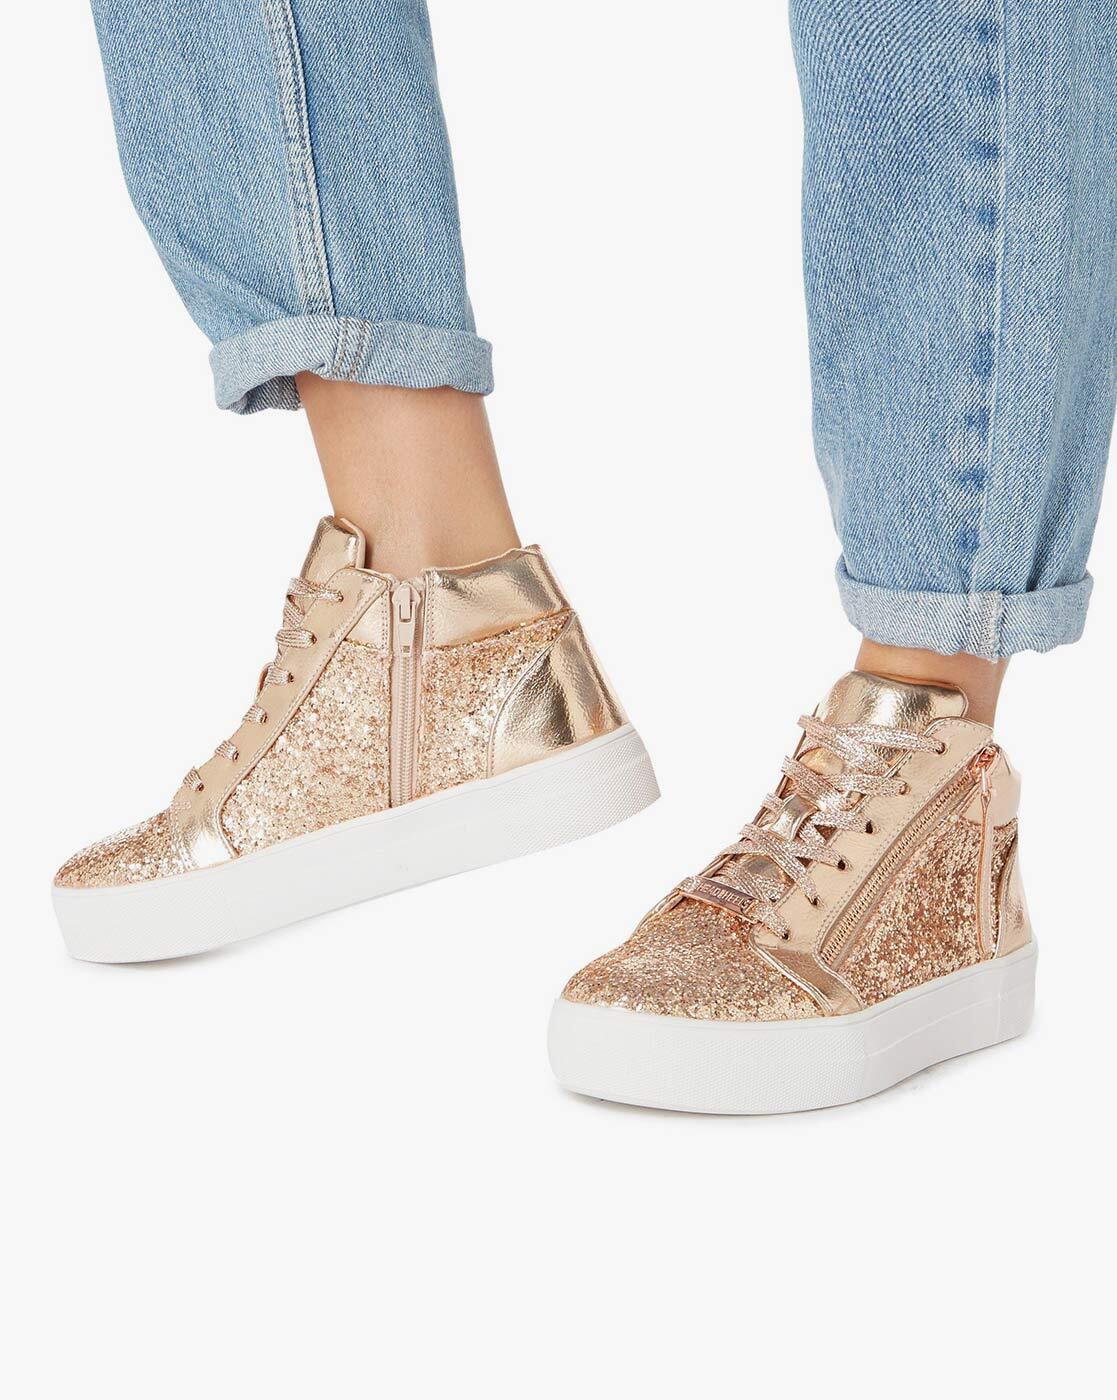 rose gold casual shoes